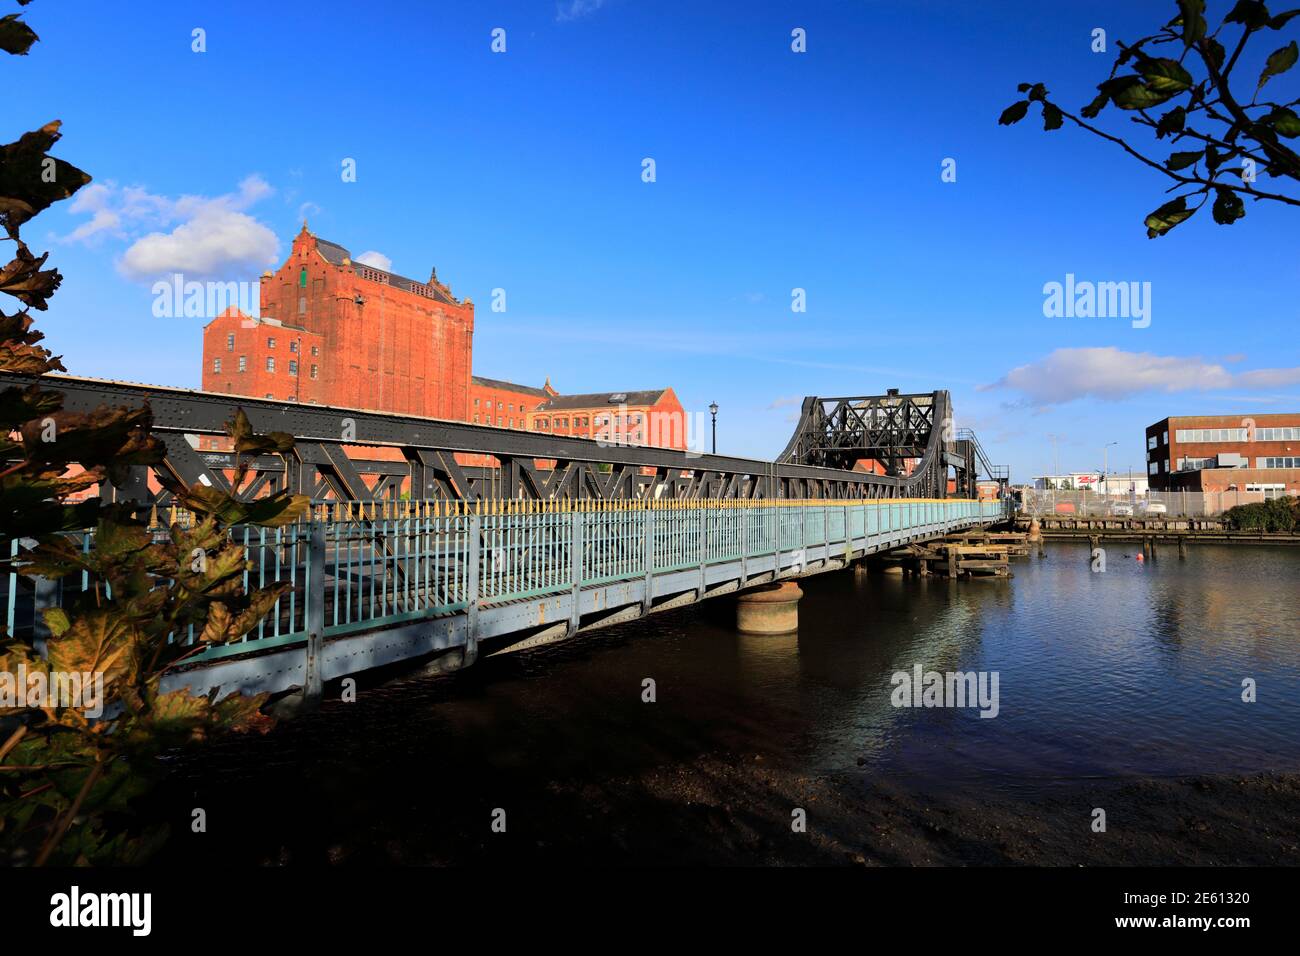 The Corporation Bridge, Grimsby town, Lincolnshire County, England The Corporation Bridge is a Scherzer rolling lift bascule bridge over the Old Dock Stock Photo